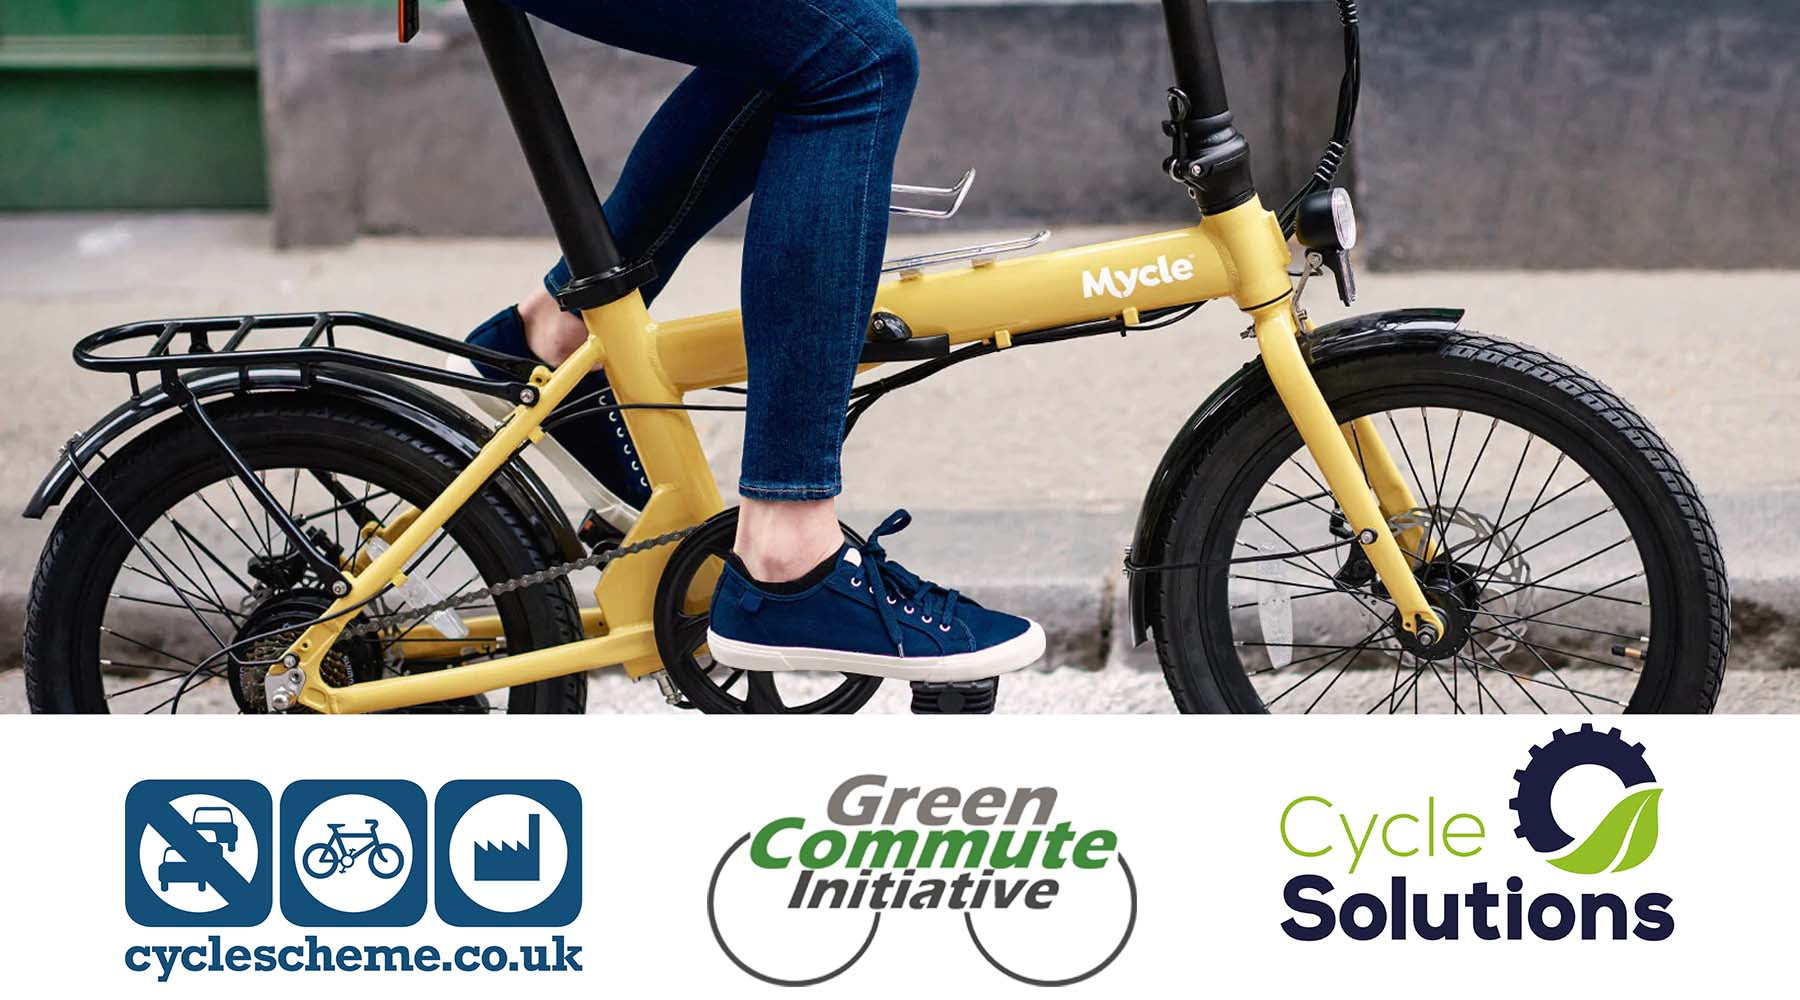 Cycle to work mycle e-bikes | cyclescheme green commute initiate and cycle solutions